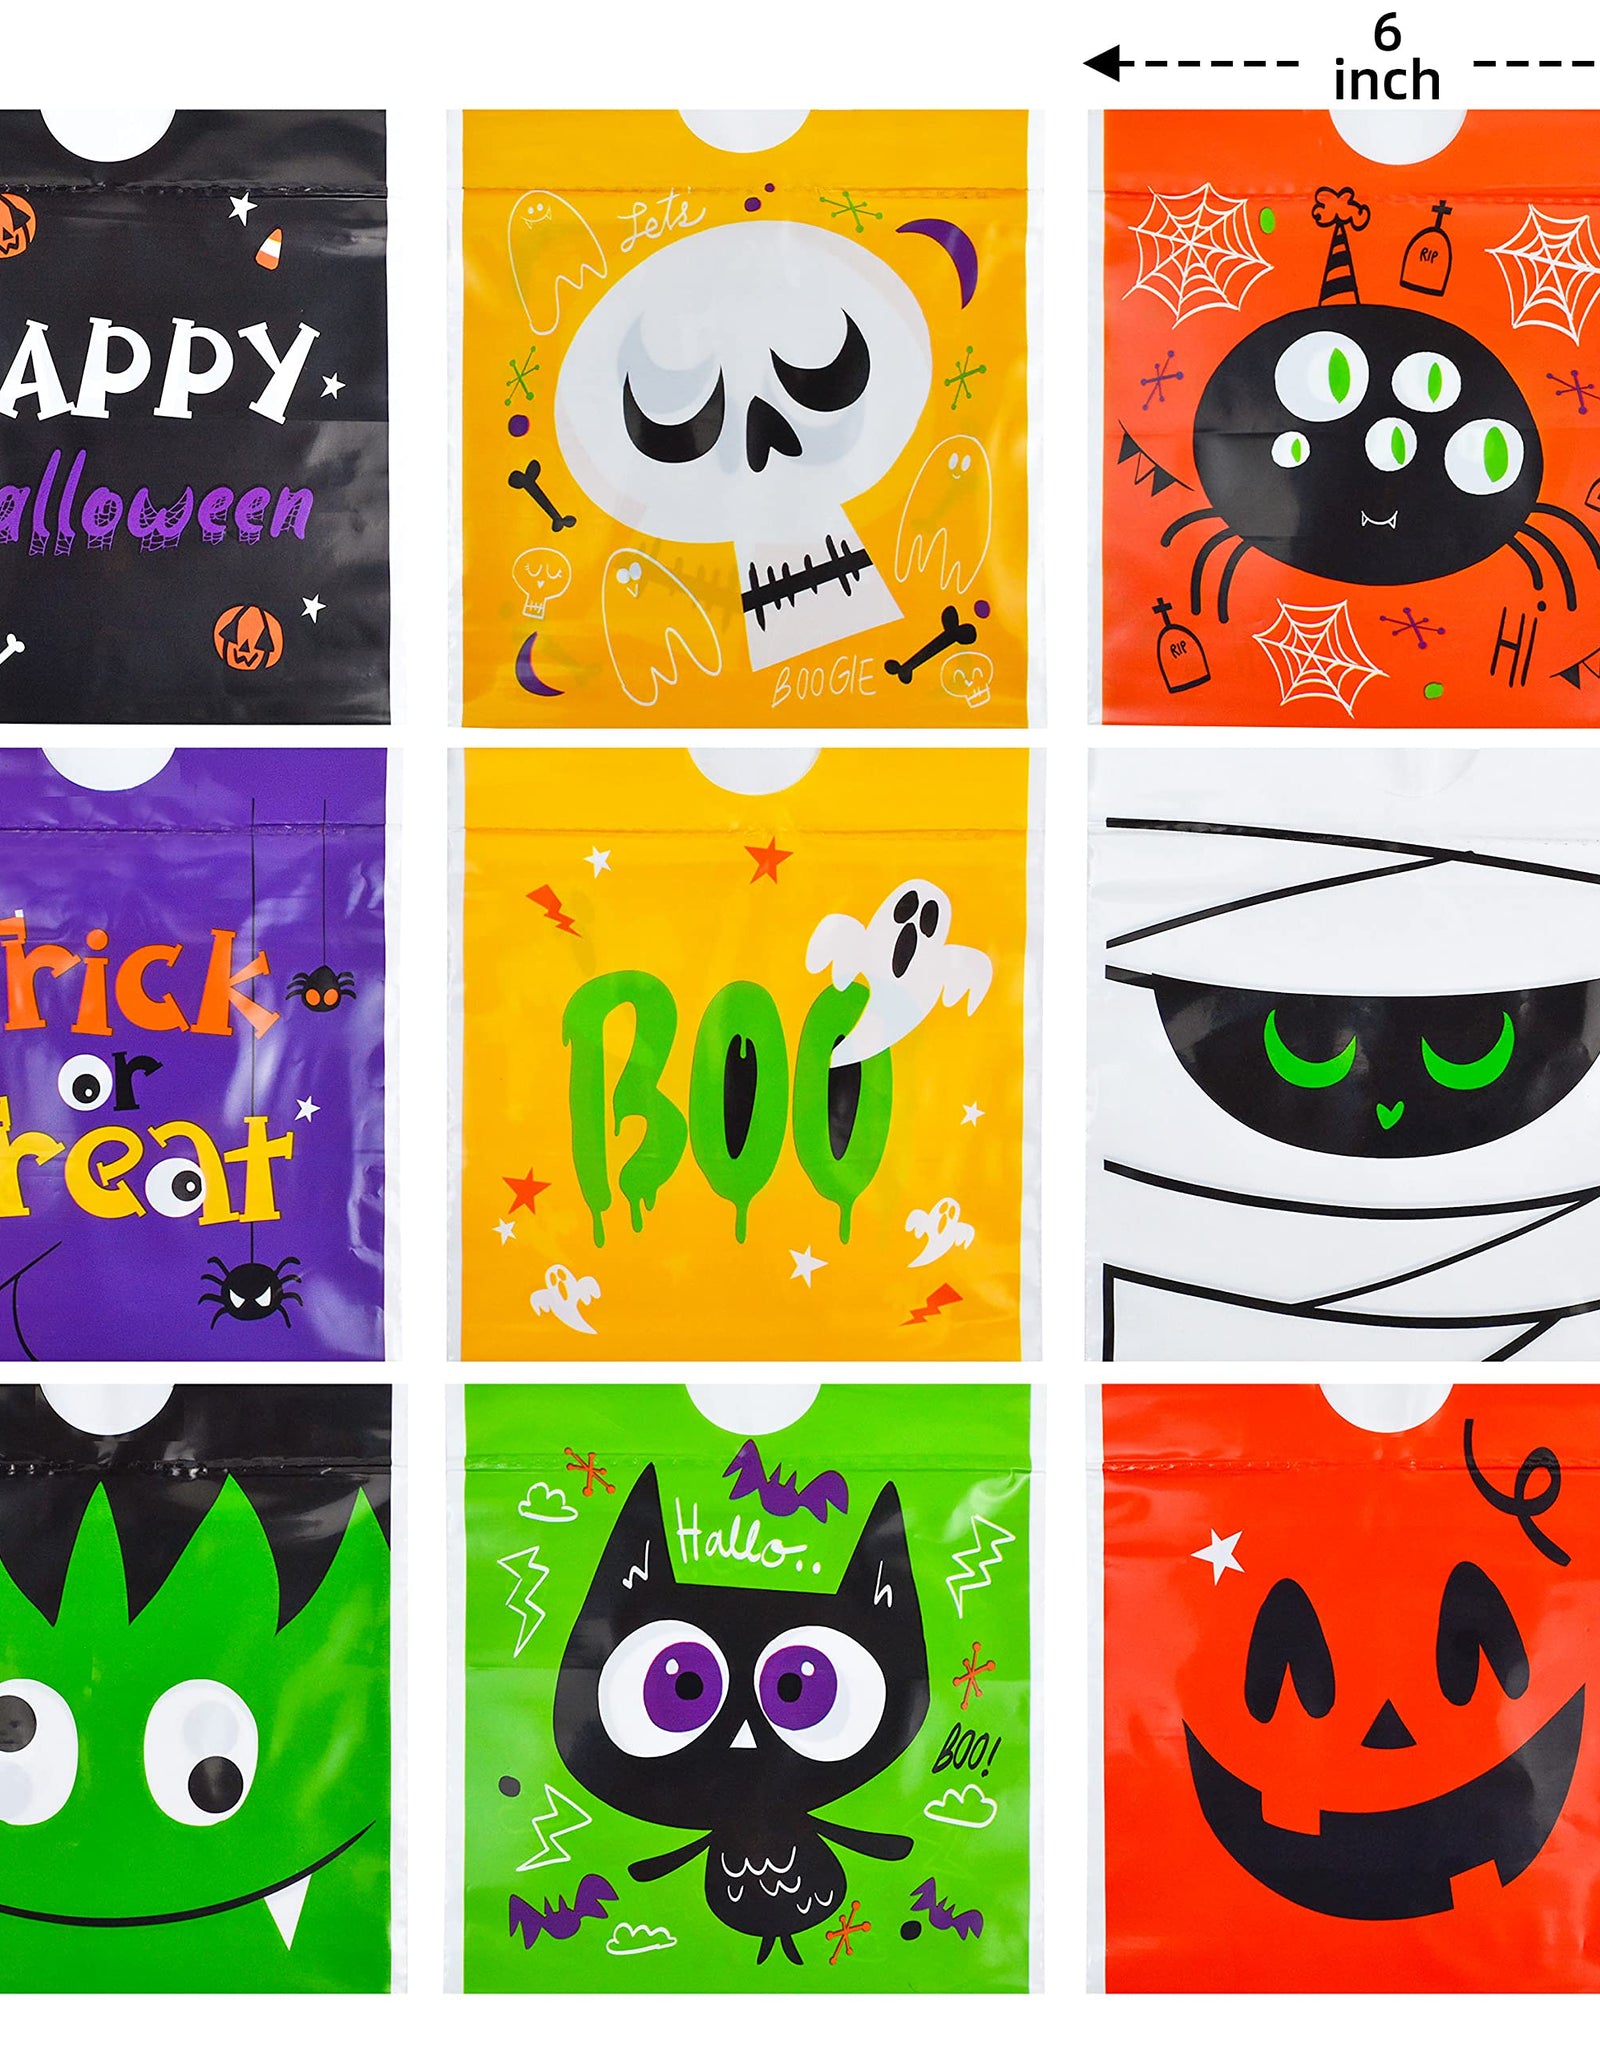 JOYIN 108 Pcs Halloween Drawstring Treat Bags with 9 Character Designs, Mini Halloween Goodie Gift Bags, Trick or Treat Candy Bags for Halloween Party Favor